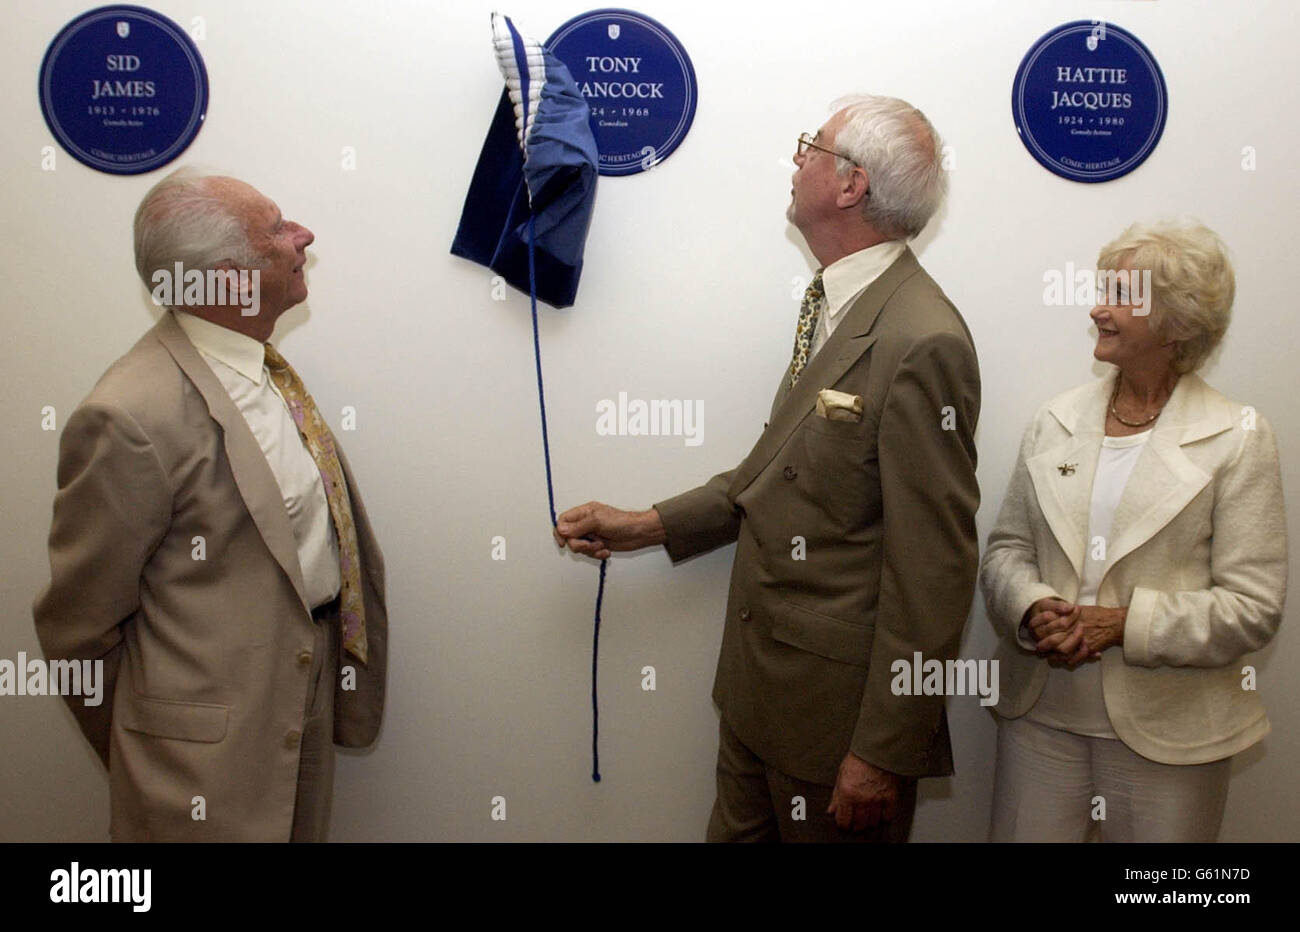 Writer Ray Galton watched by Alec Bregazi and Liz Fraser, unveils Tony Hancock's plaque at Broadcasting House in central London during the unveiling of Comic Heritage Blue Plaques for comedy legends Sid James, Tony Hancock and Hattie Jacques. Stock Photo